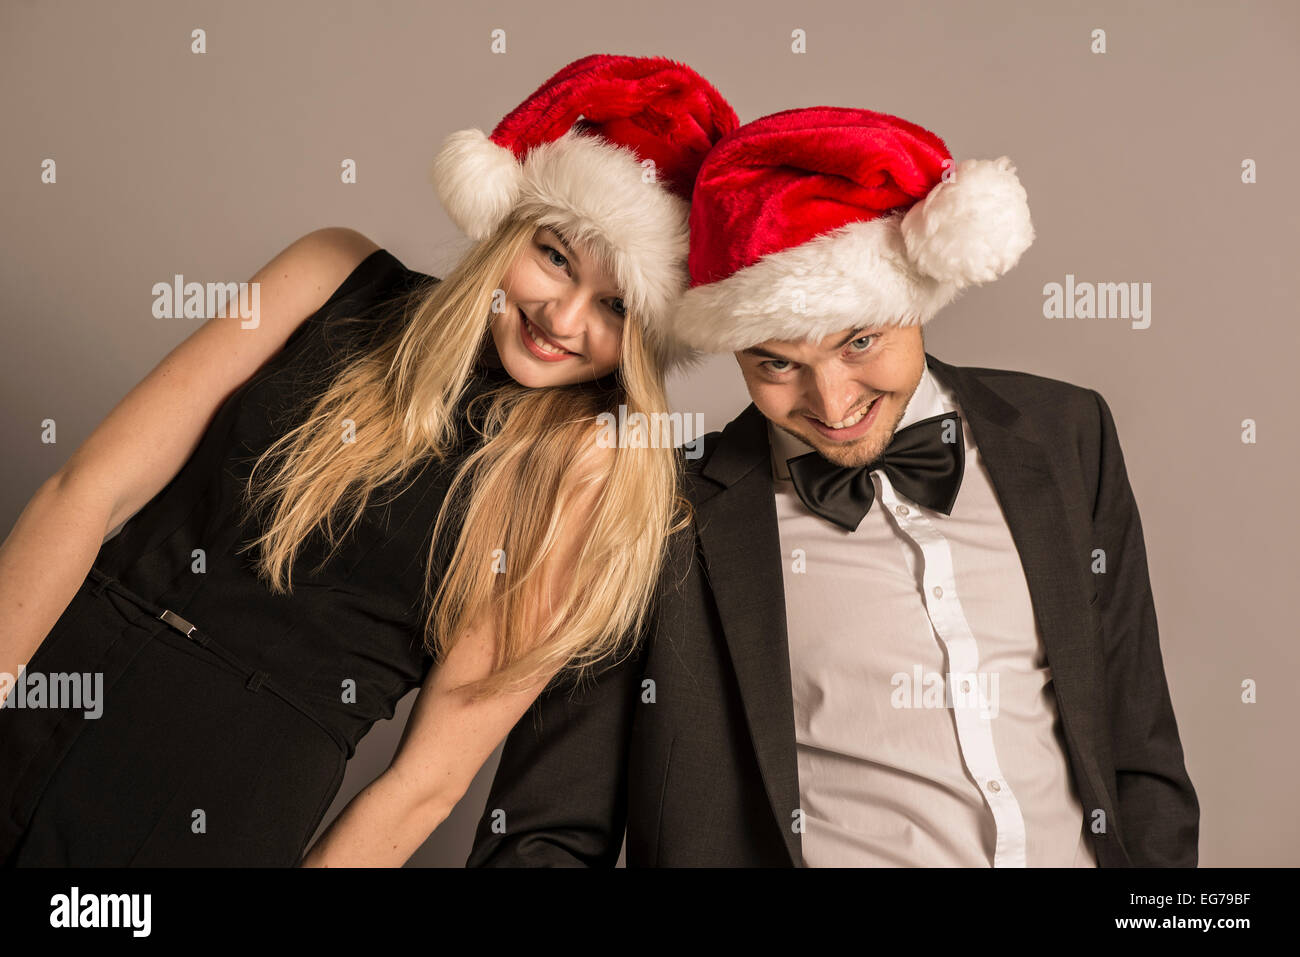 Portrait of well dressed young couple wearing Christmas caps Stock Photo